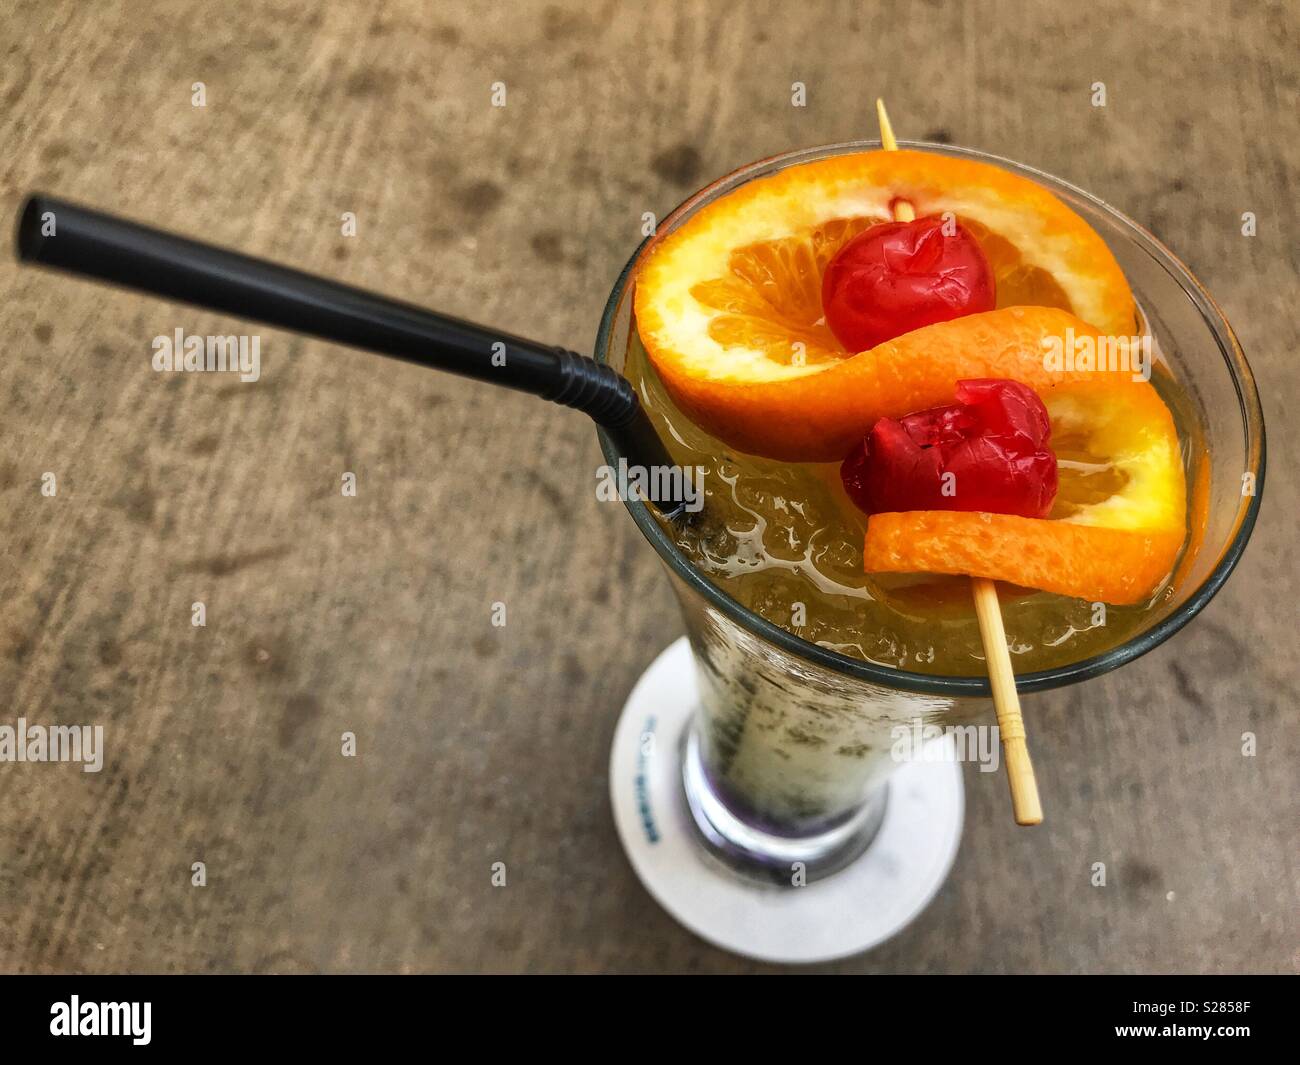 Cocktail, in a cocktail glass with a twist of orange and two cherries, high angle view Stock Photo